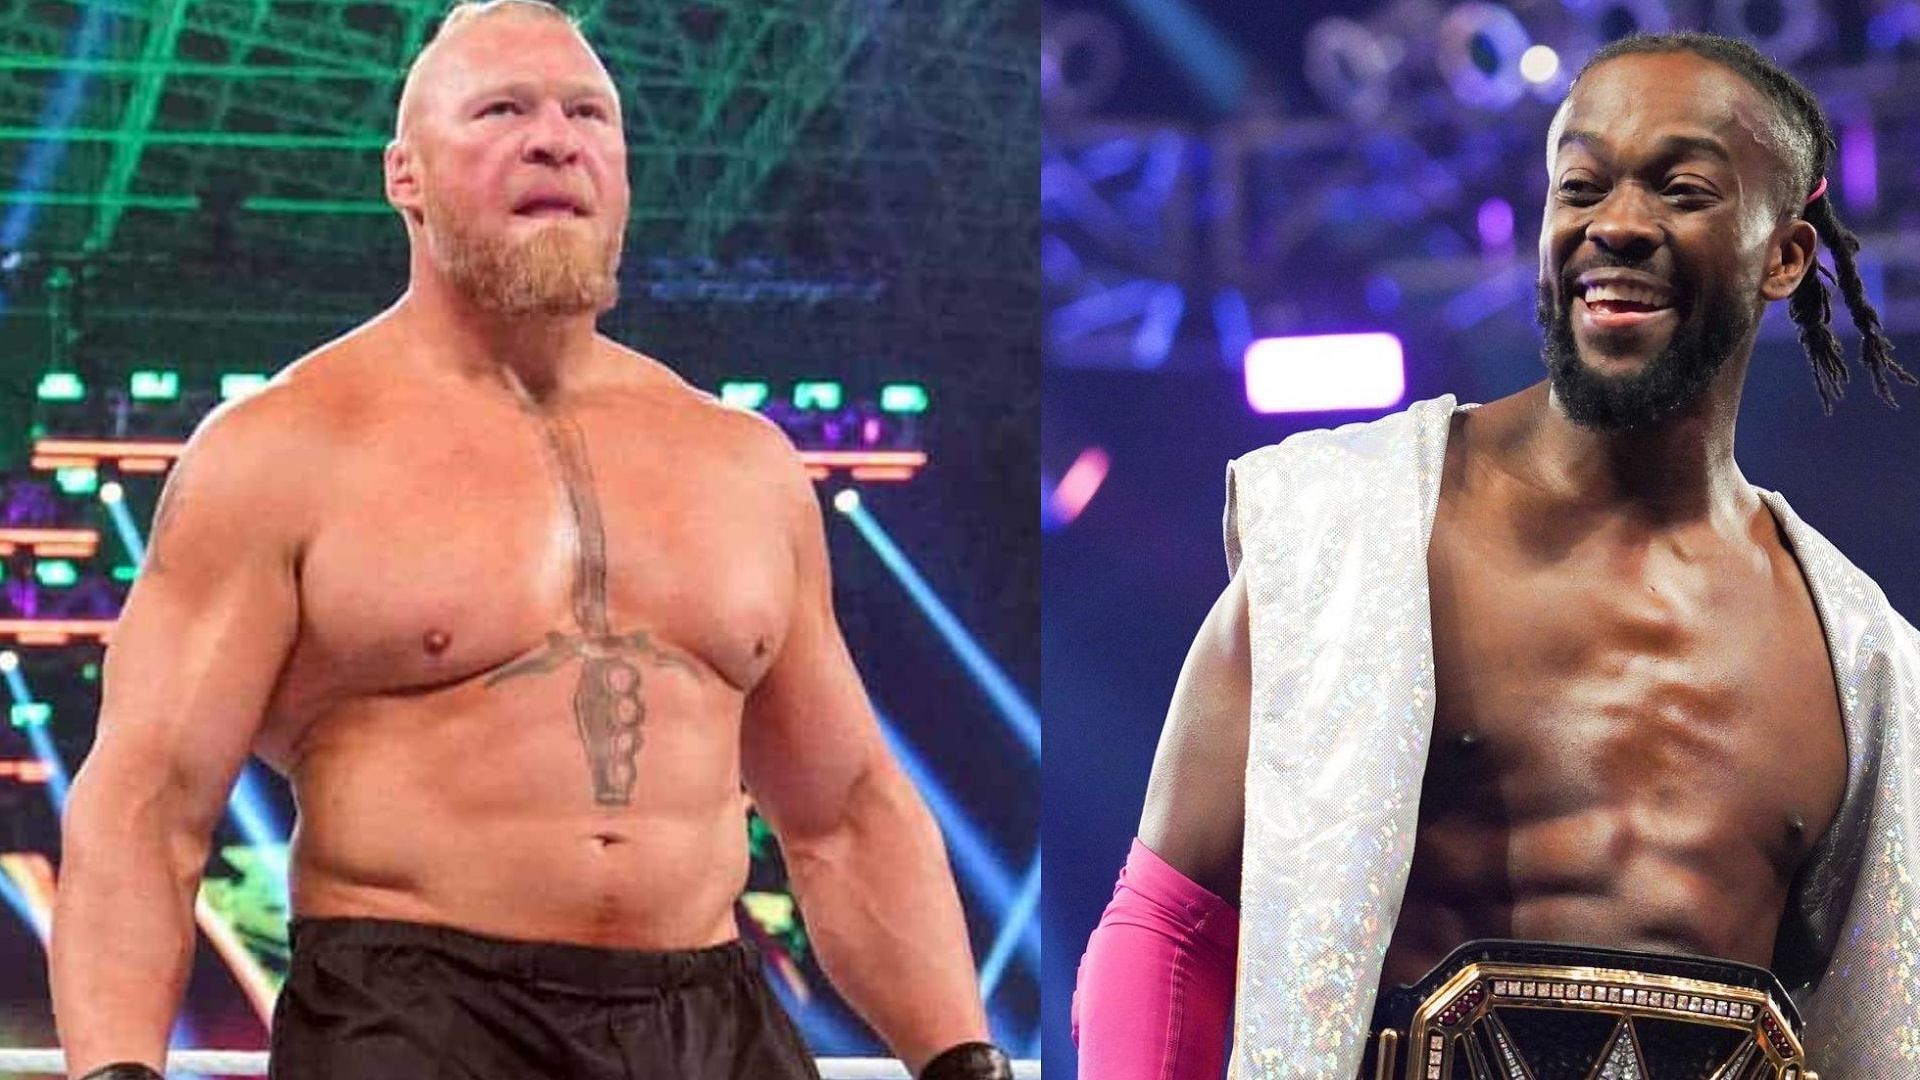 WWE Superstars Brock Lesnar and Kofi Kingston are two wrestlers who have avoided any significant injuries.